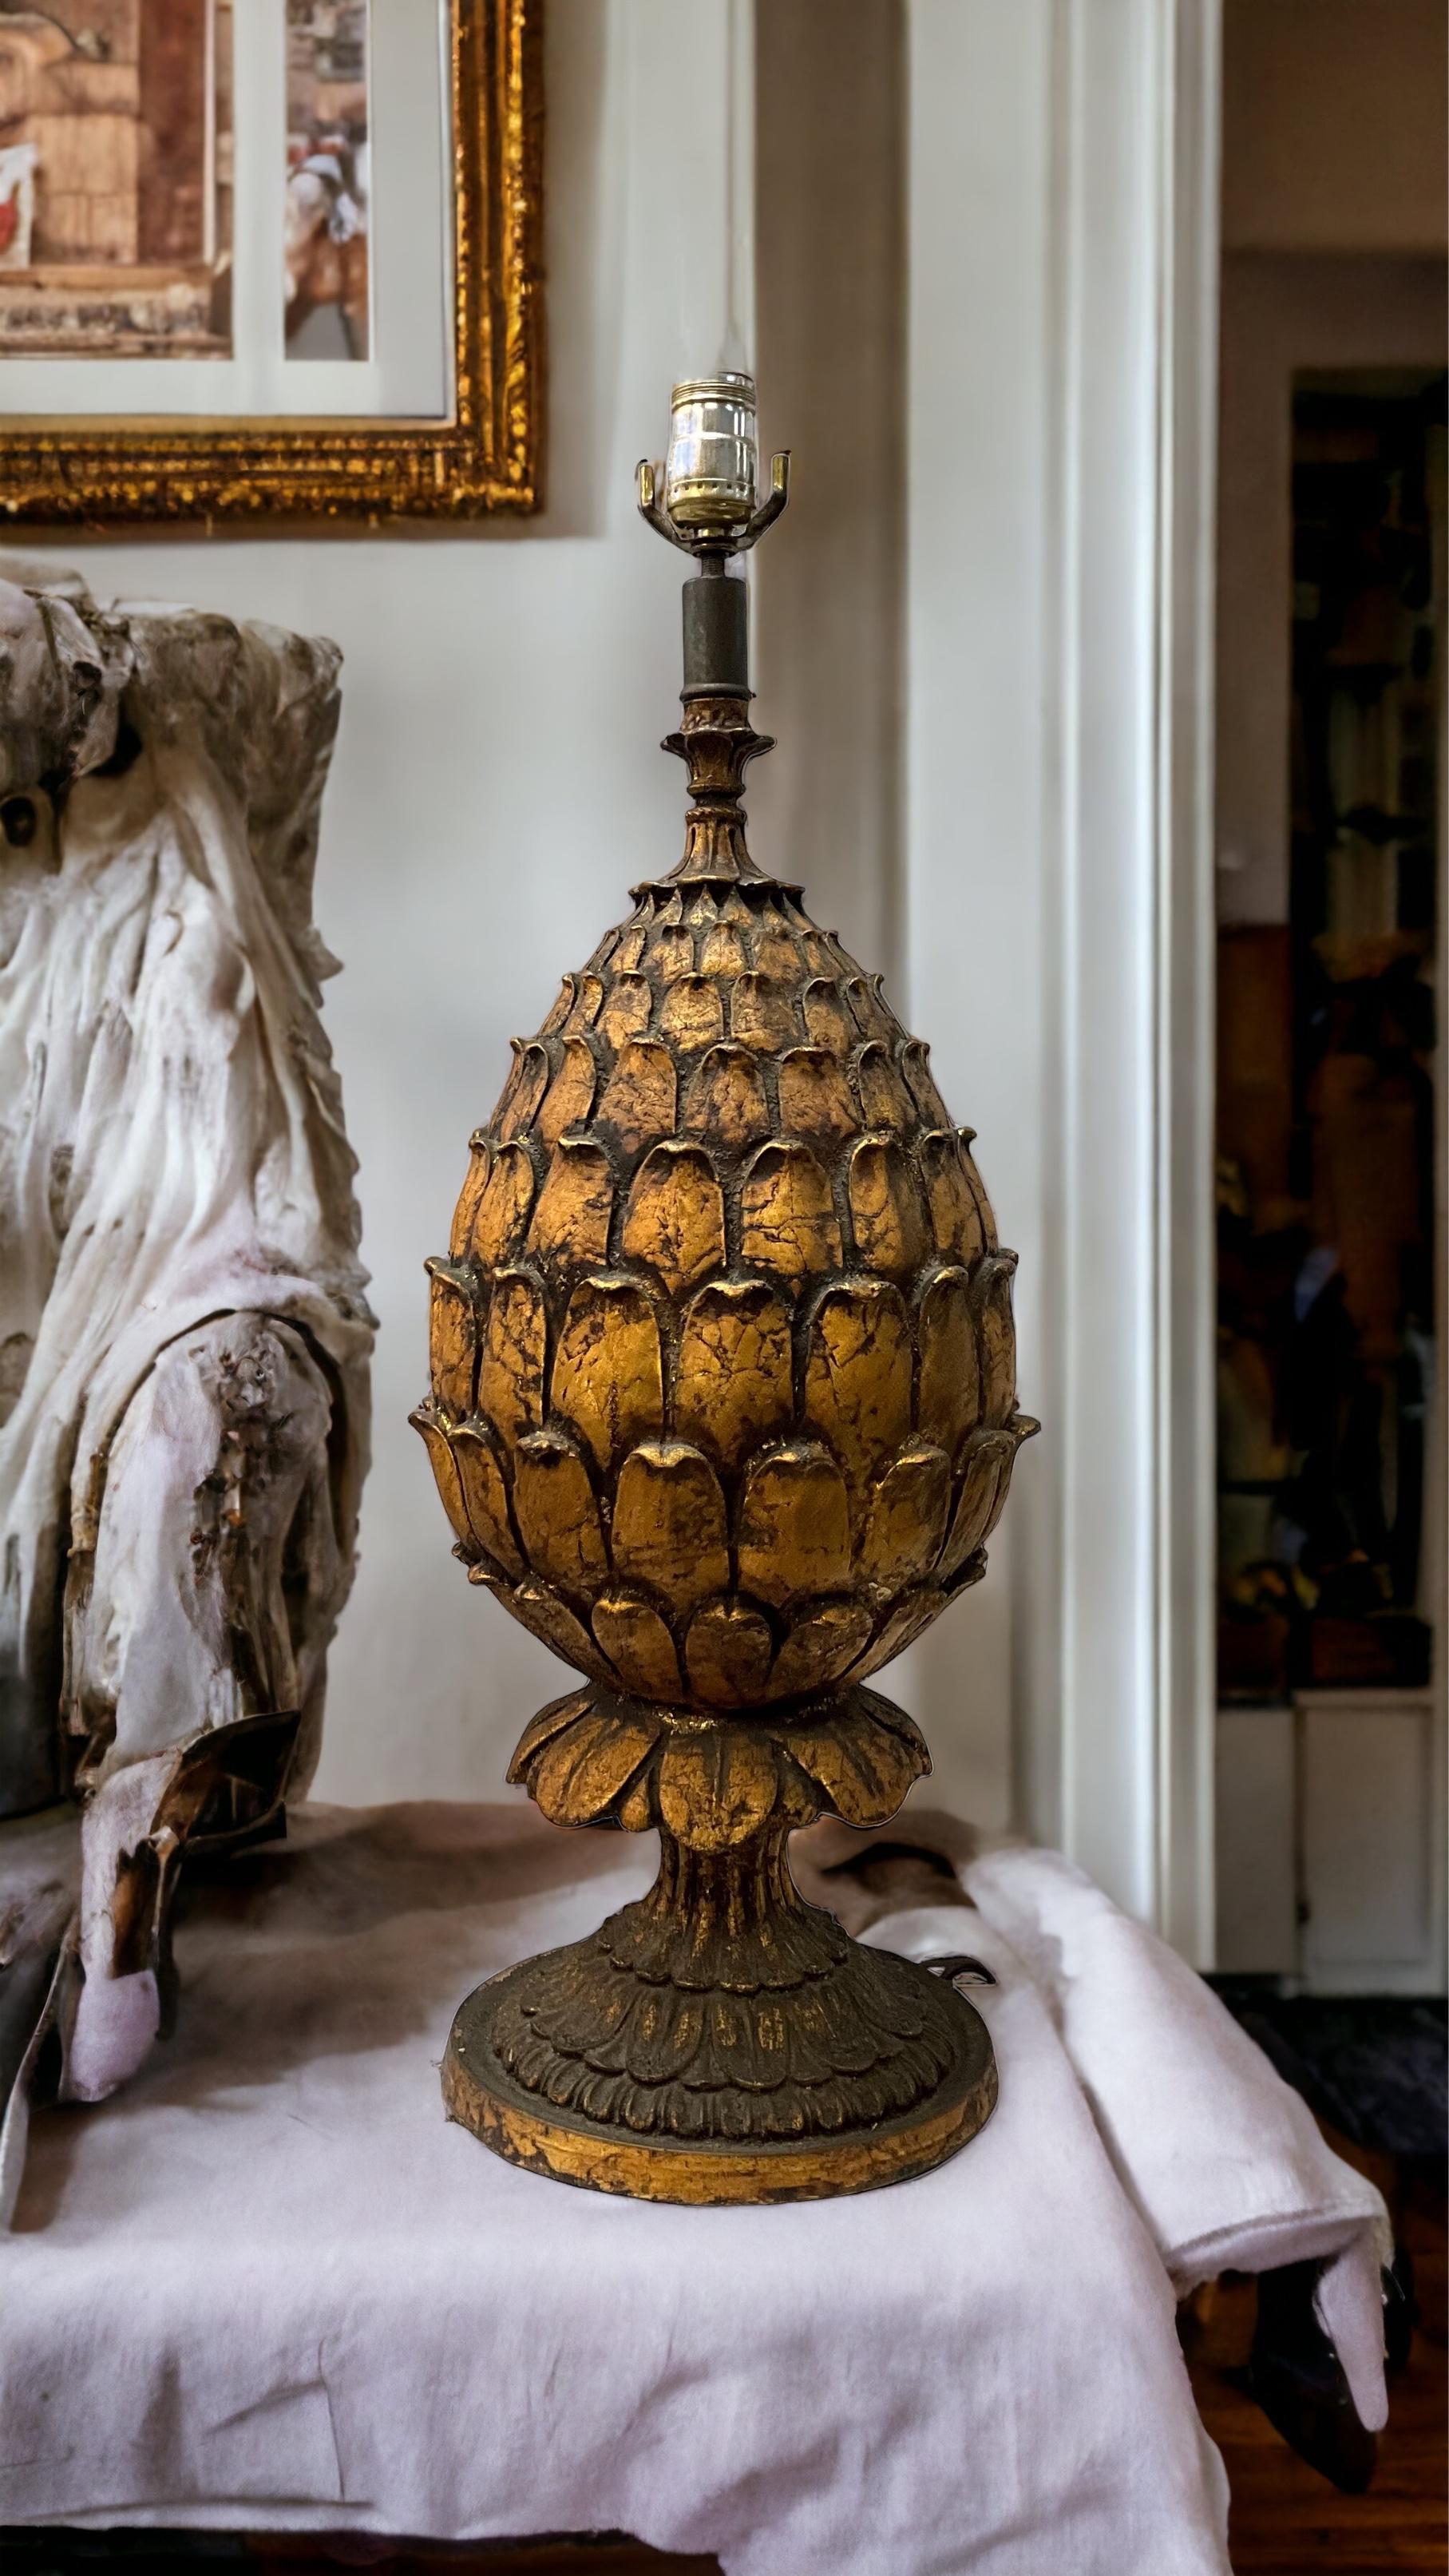 This is a large scale regency style artichoke form table lamp in working order. The body is a mix of composite and wood. It is a good looking piece!